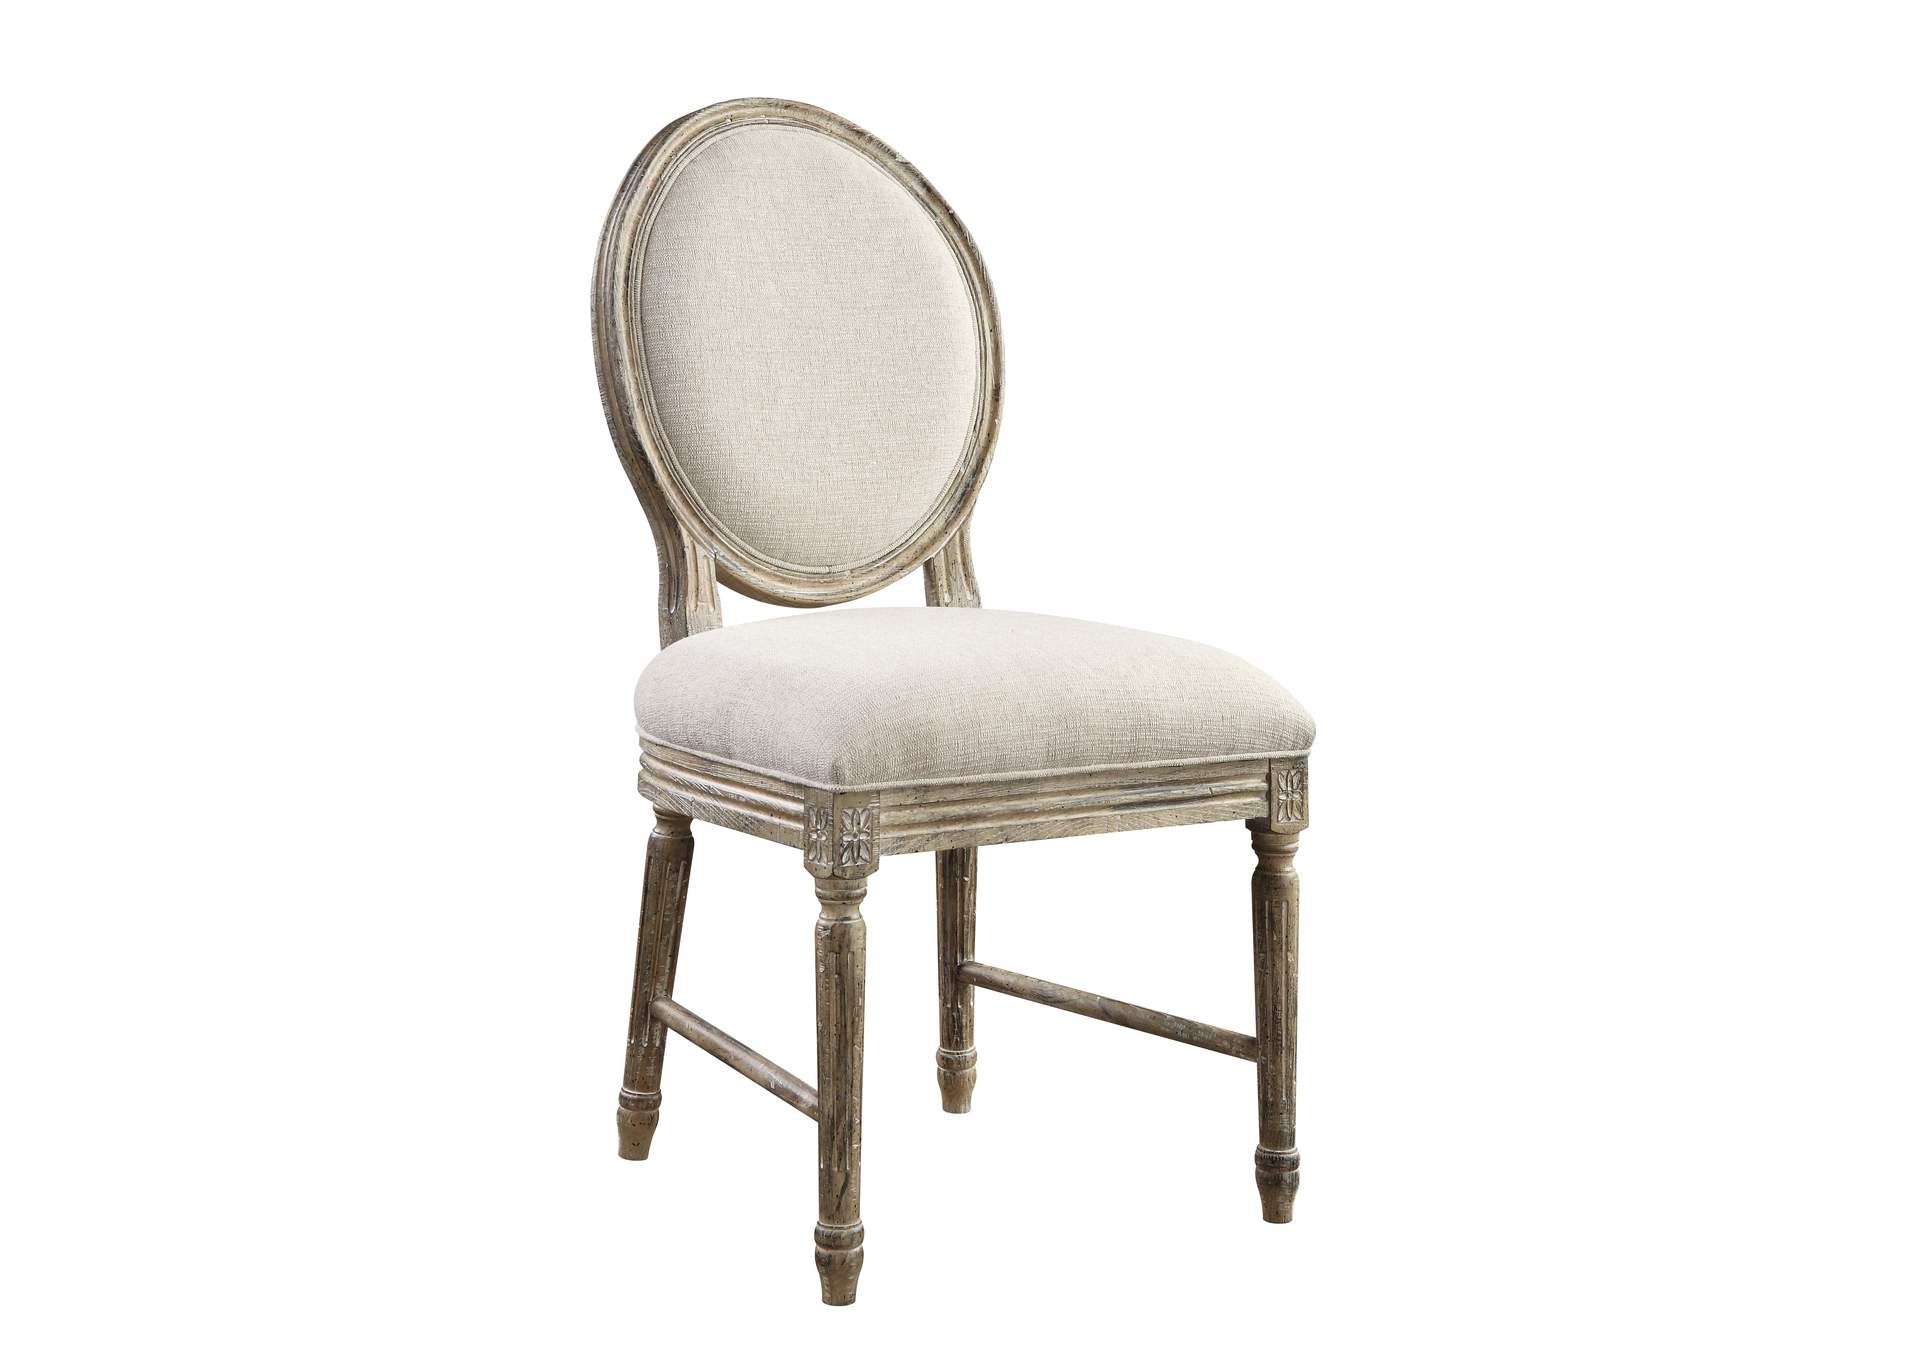 Interlude Upholstered Dining Chair,Emerald Home Furnishings